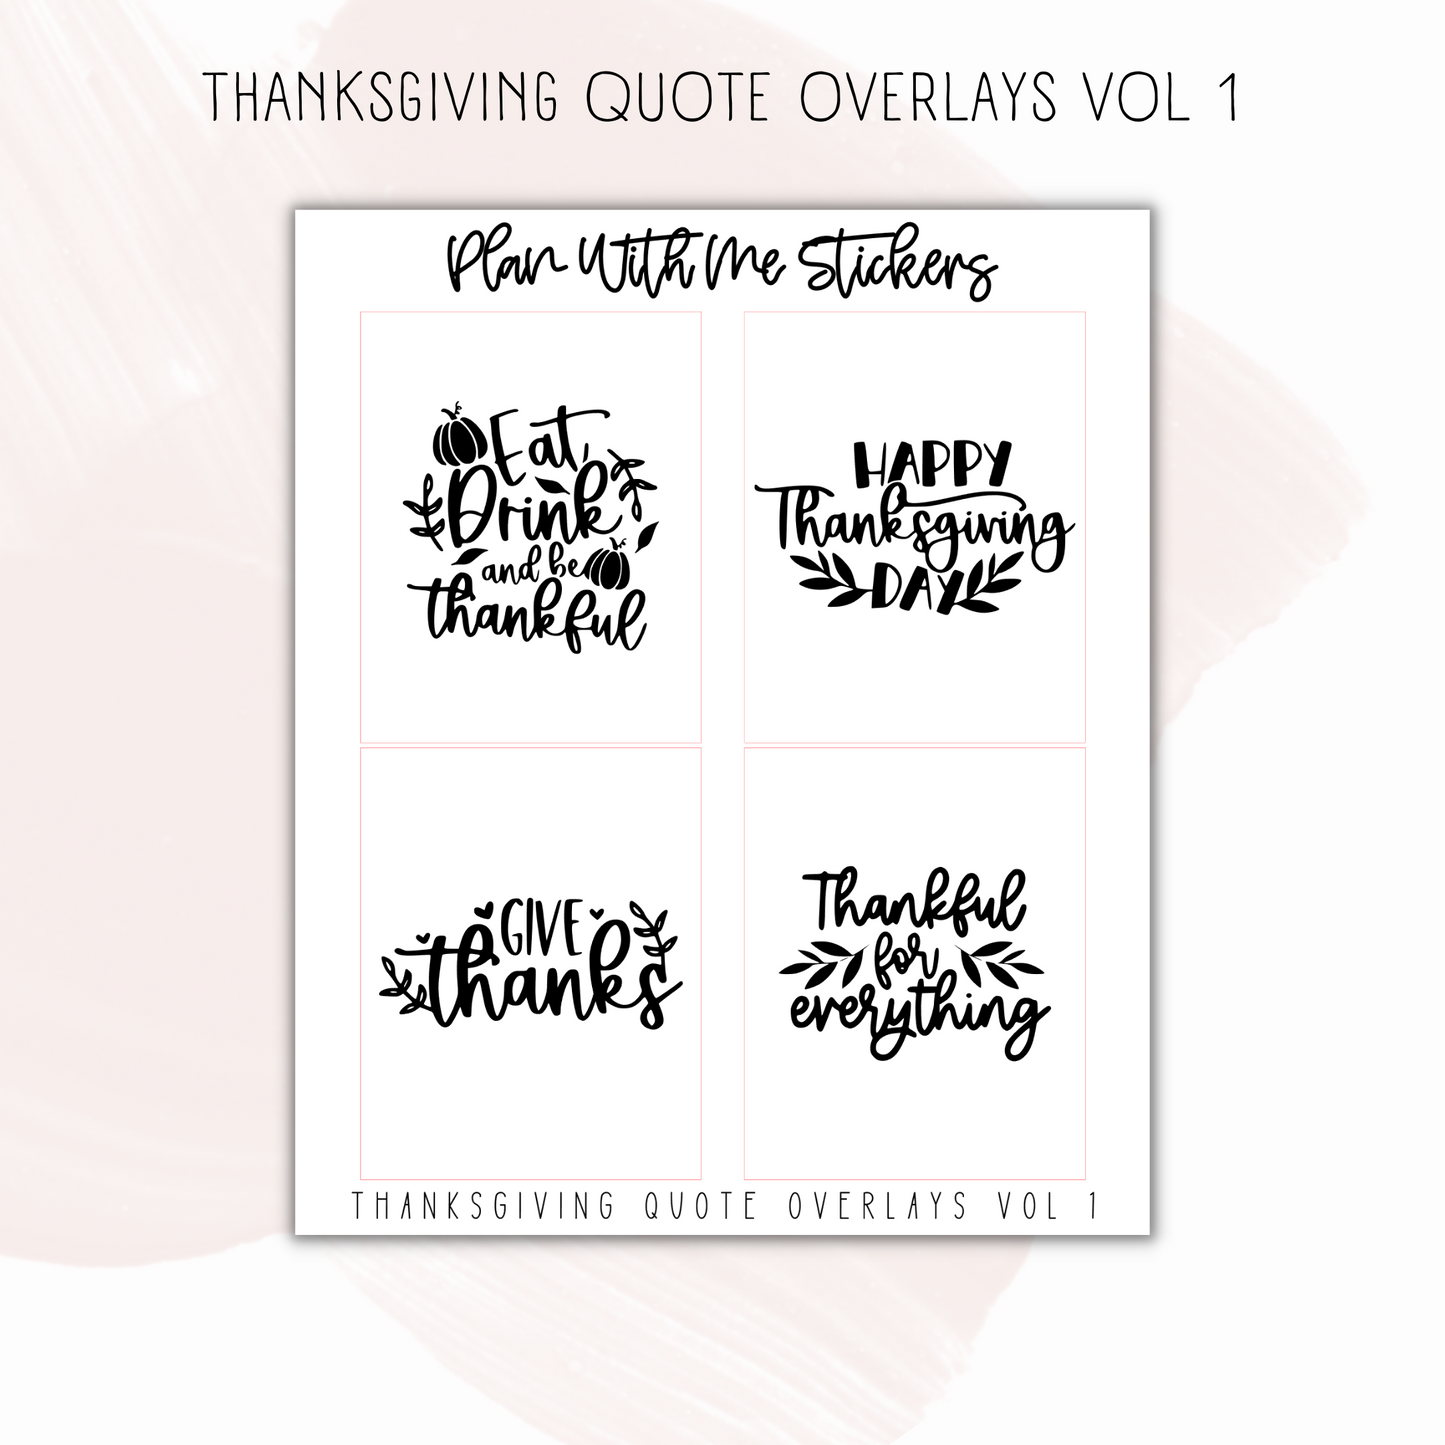 Thanksgiving Quote Overlays Vol 1